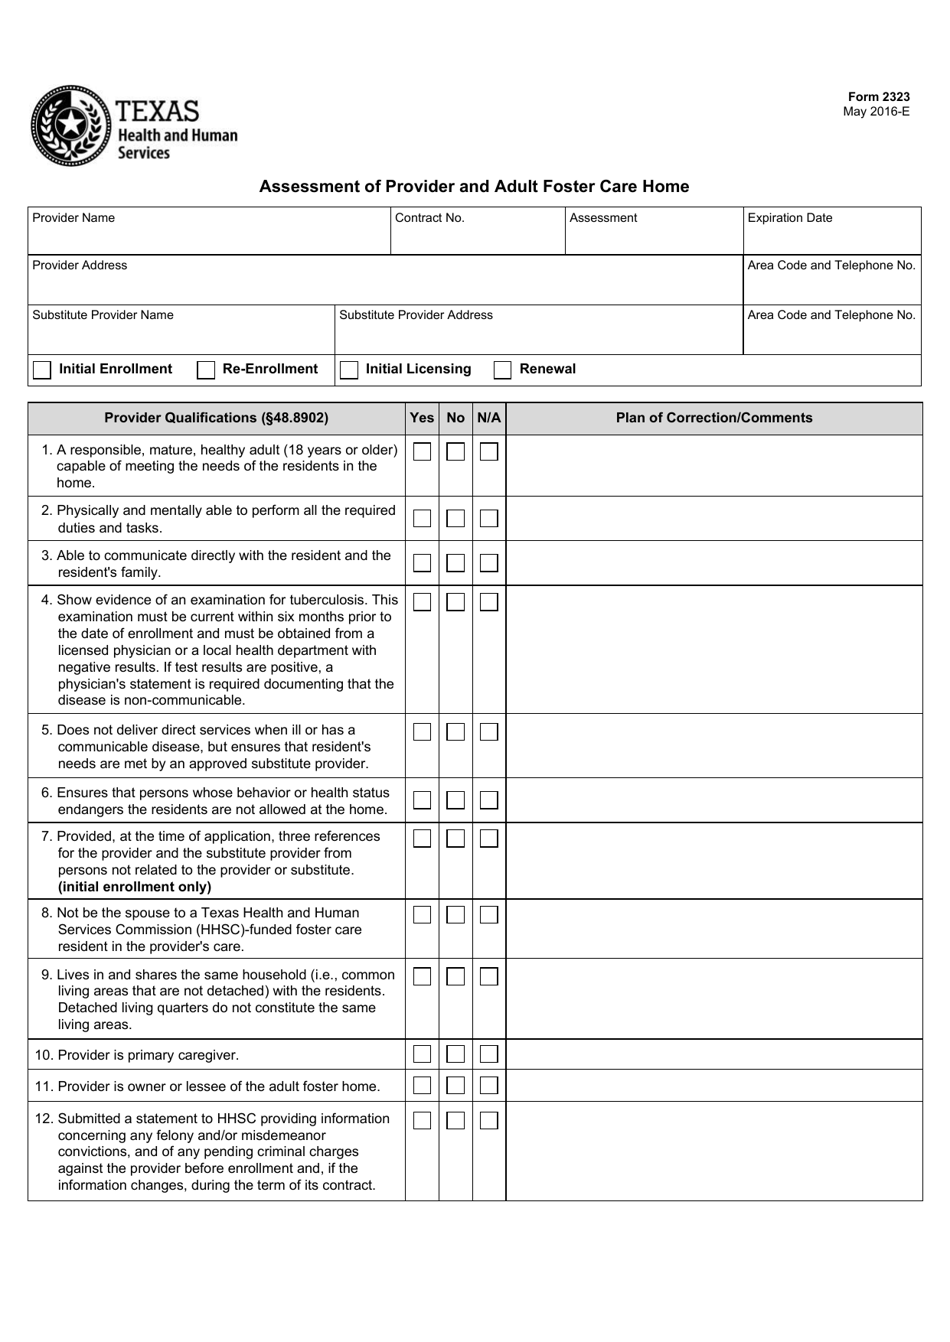 Form 2323 Assessment of Provider and Adult Foster Care Home - Texas, Page 1